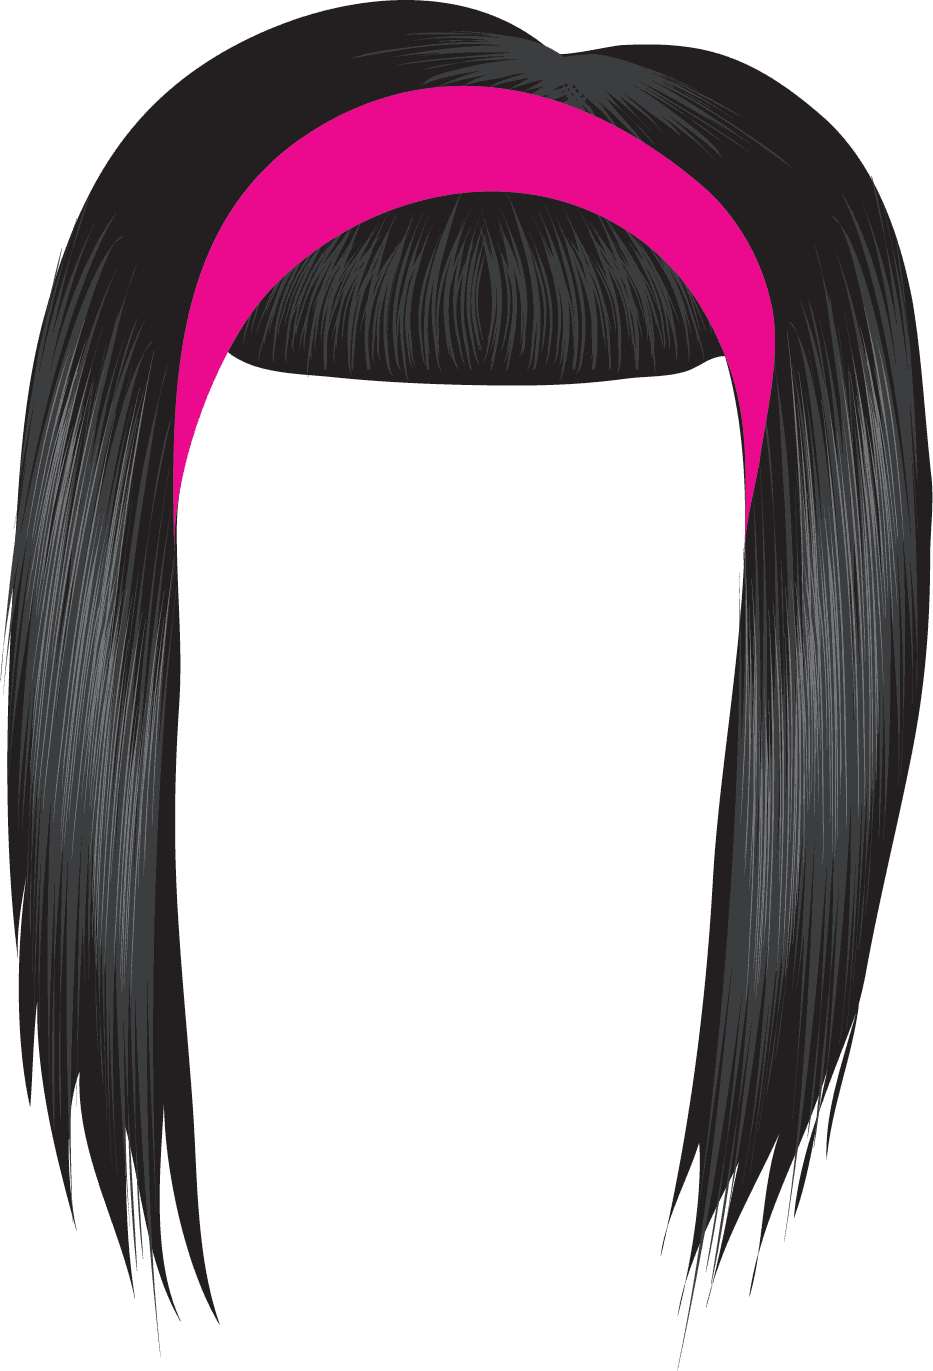 Hair clipart. Black free images cliparting